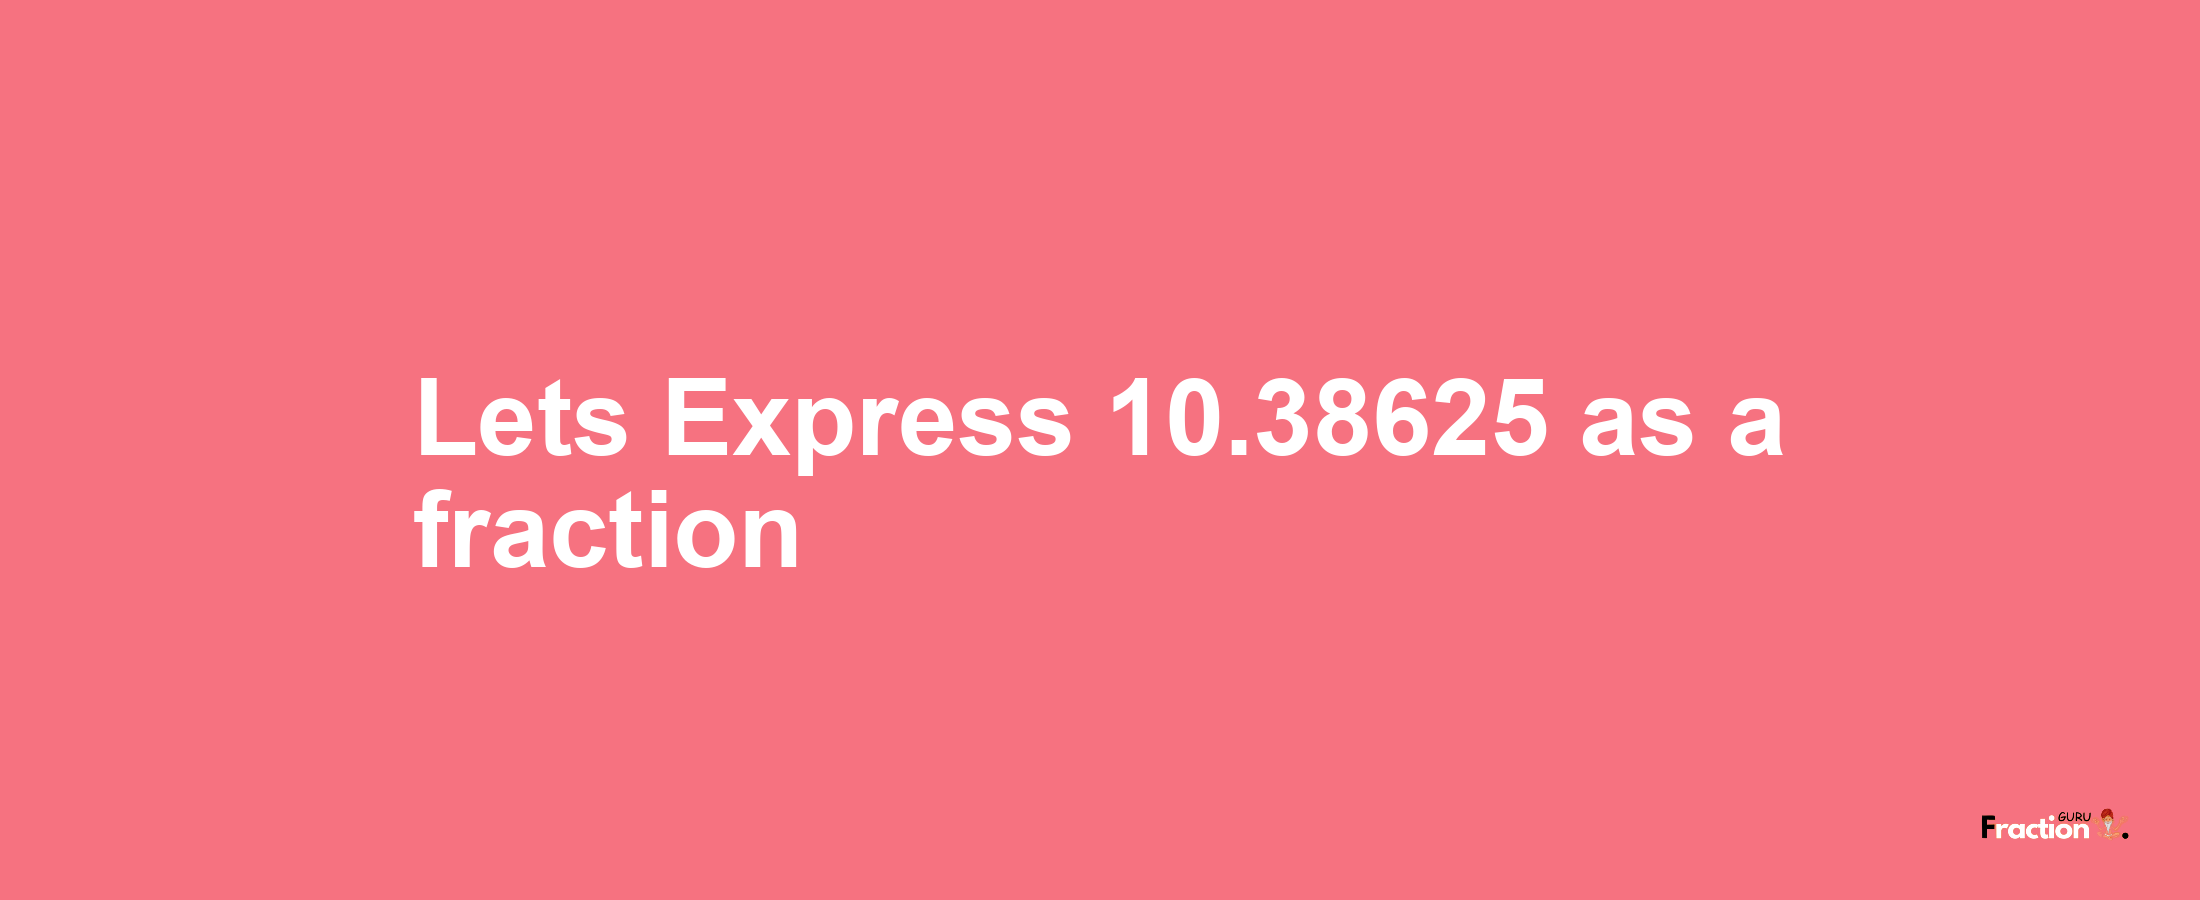 Lets Express 10.38625 as afraction